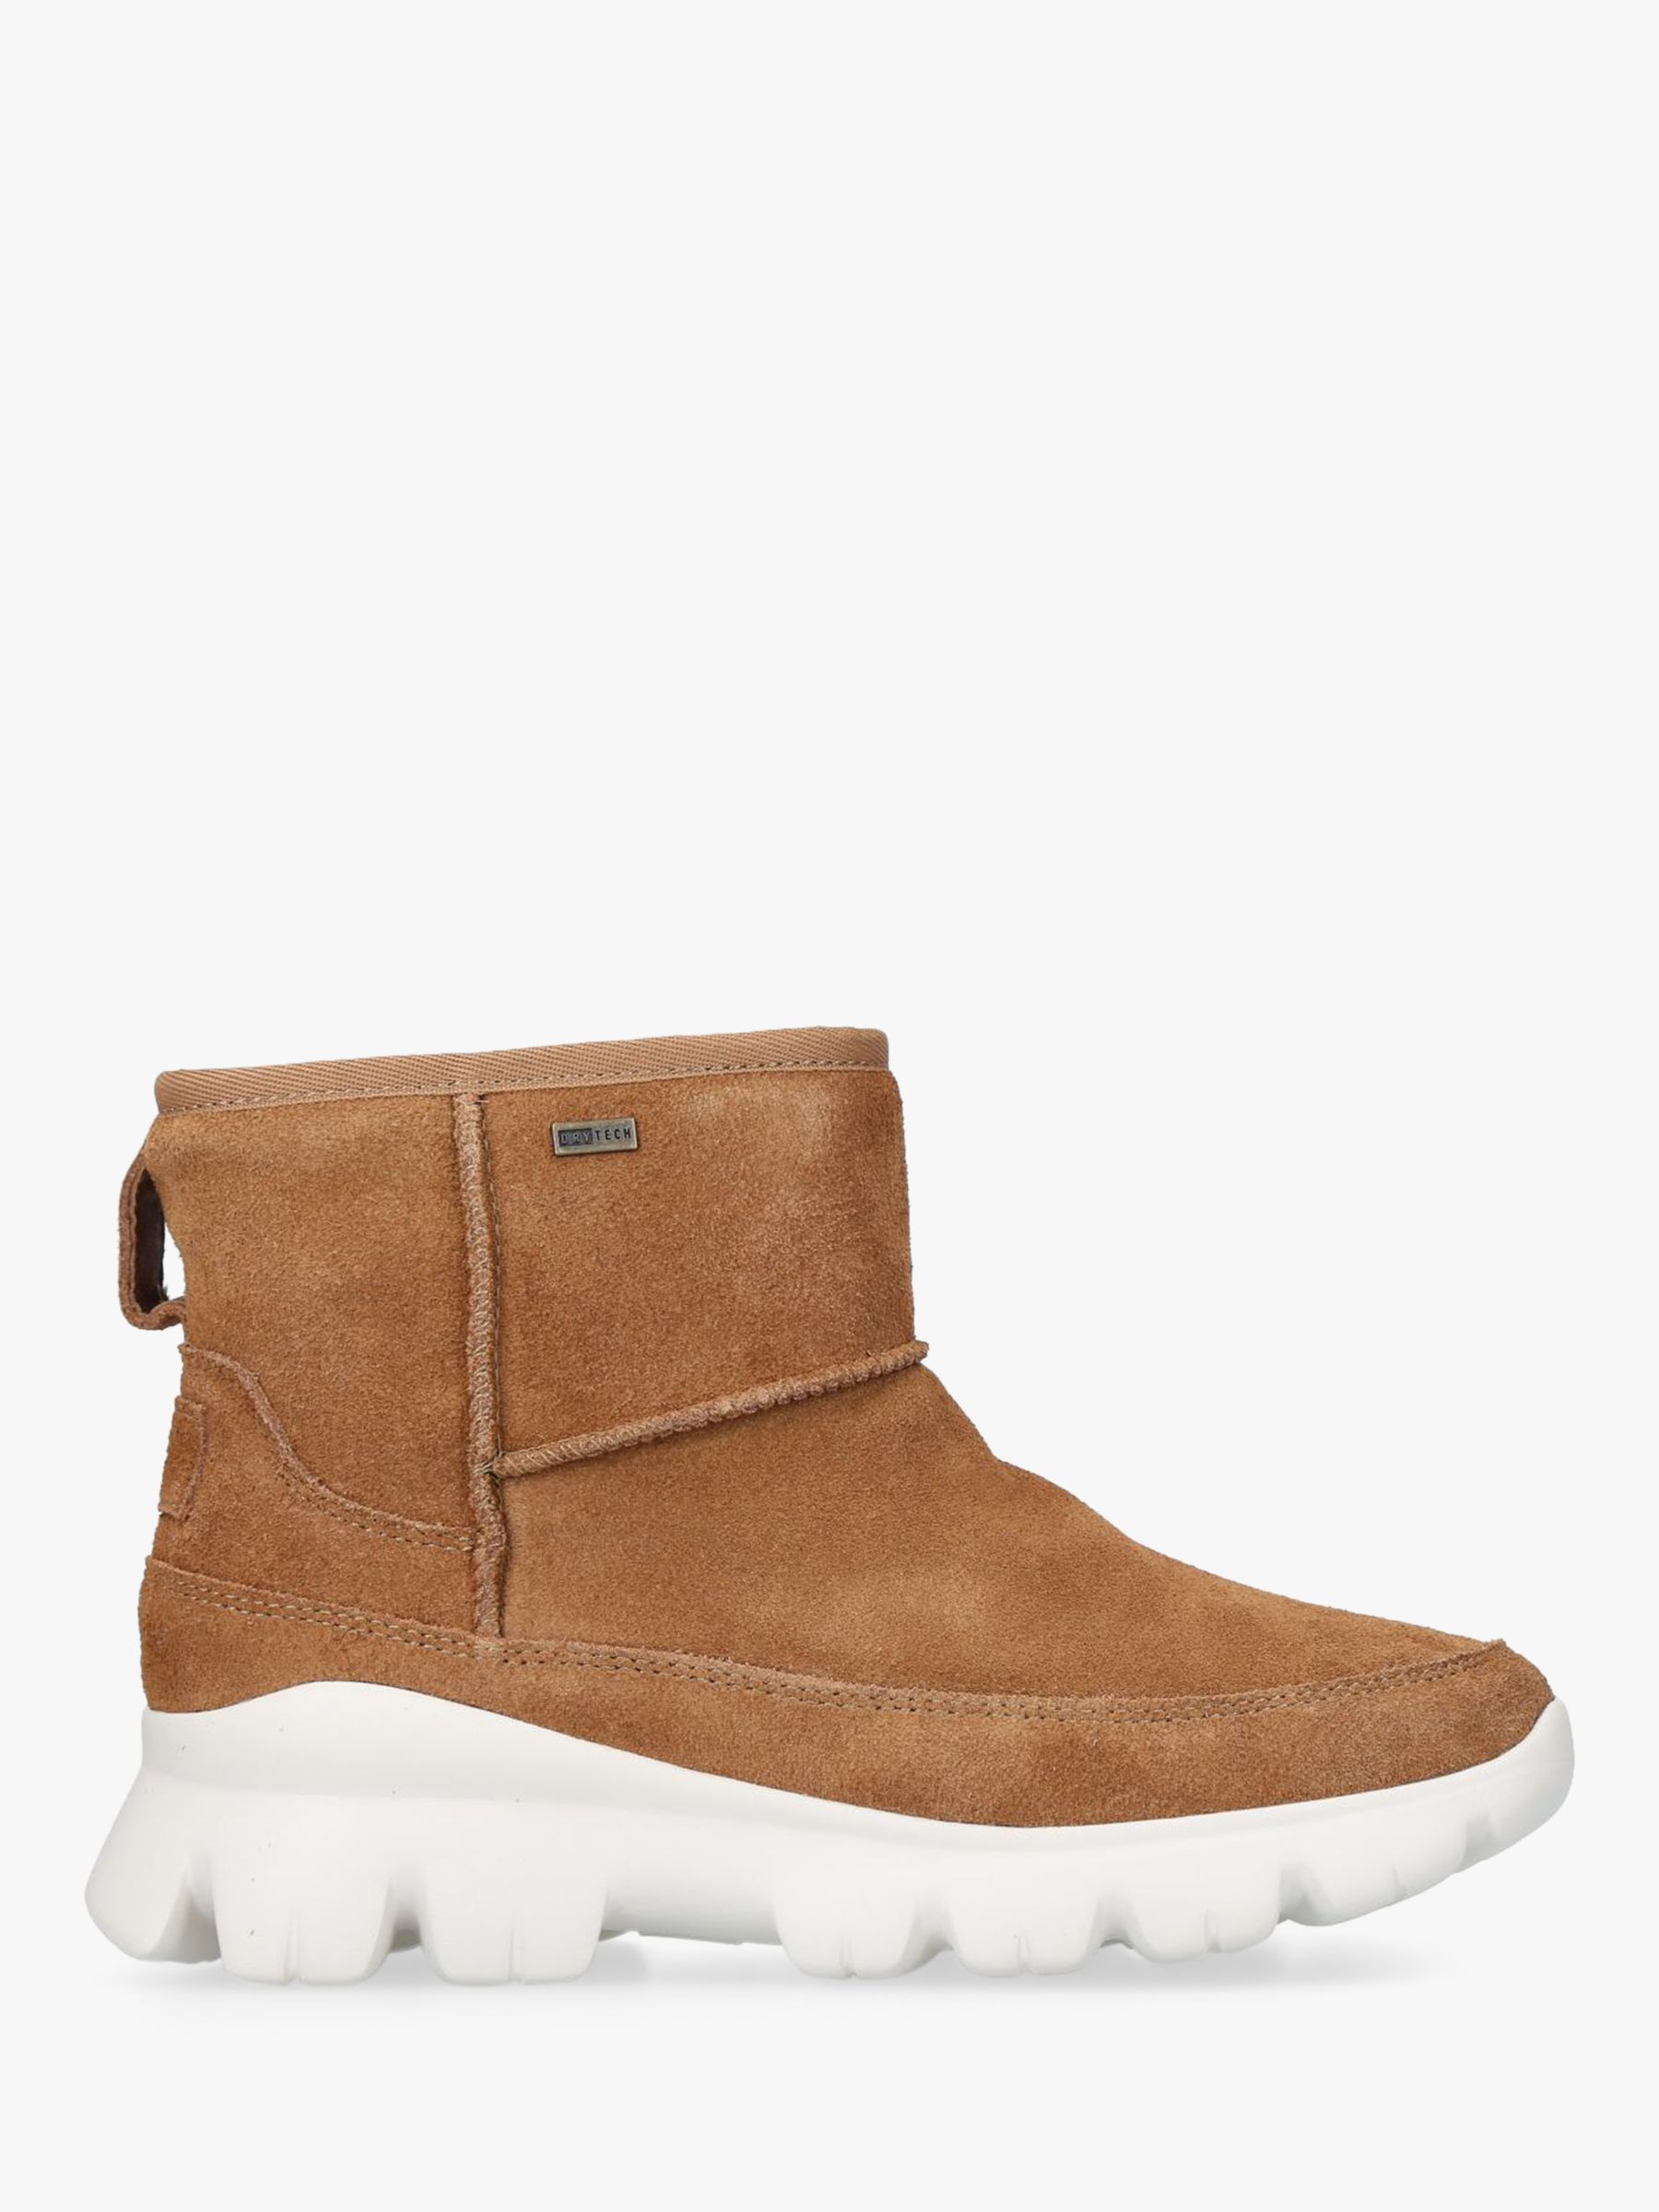 order uggs online for cheap